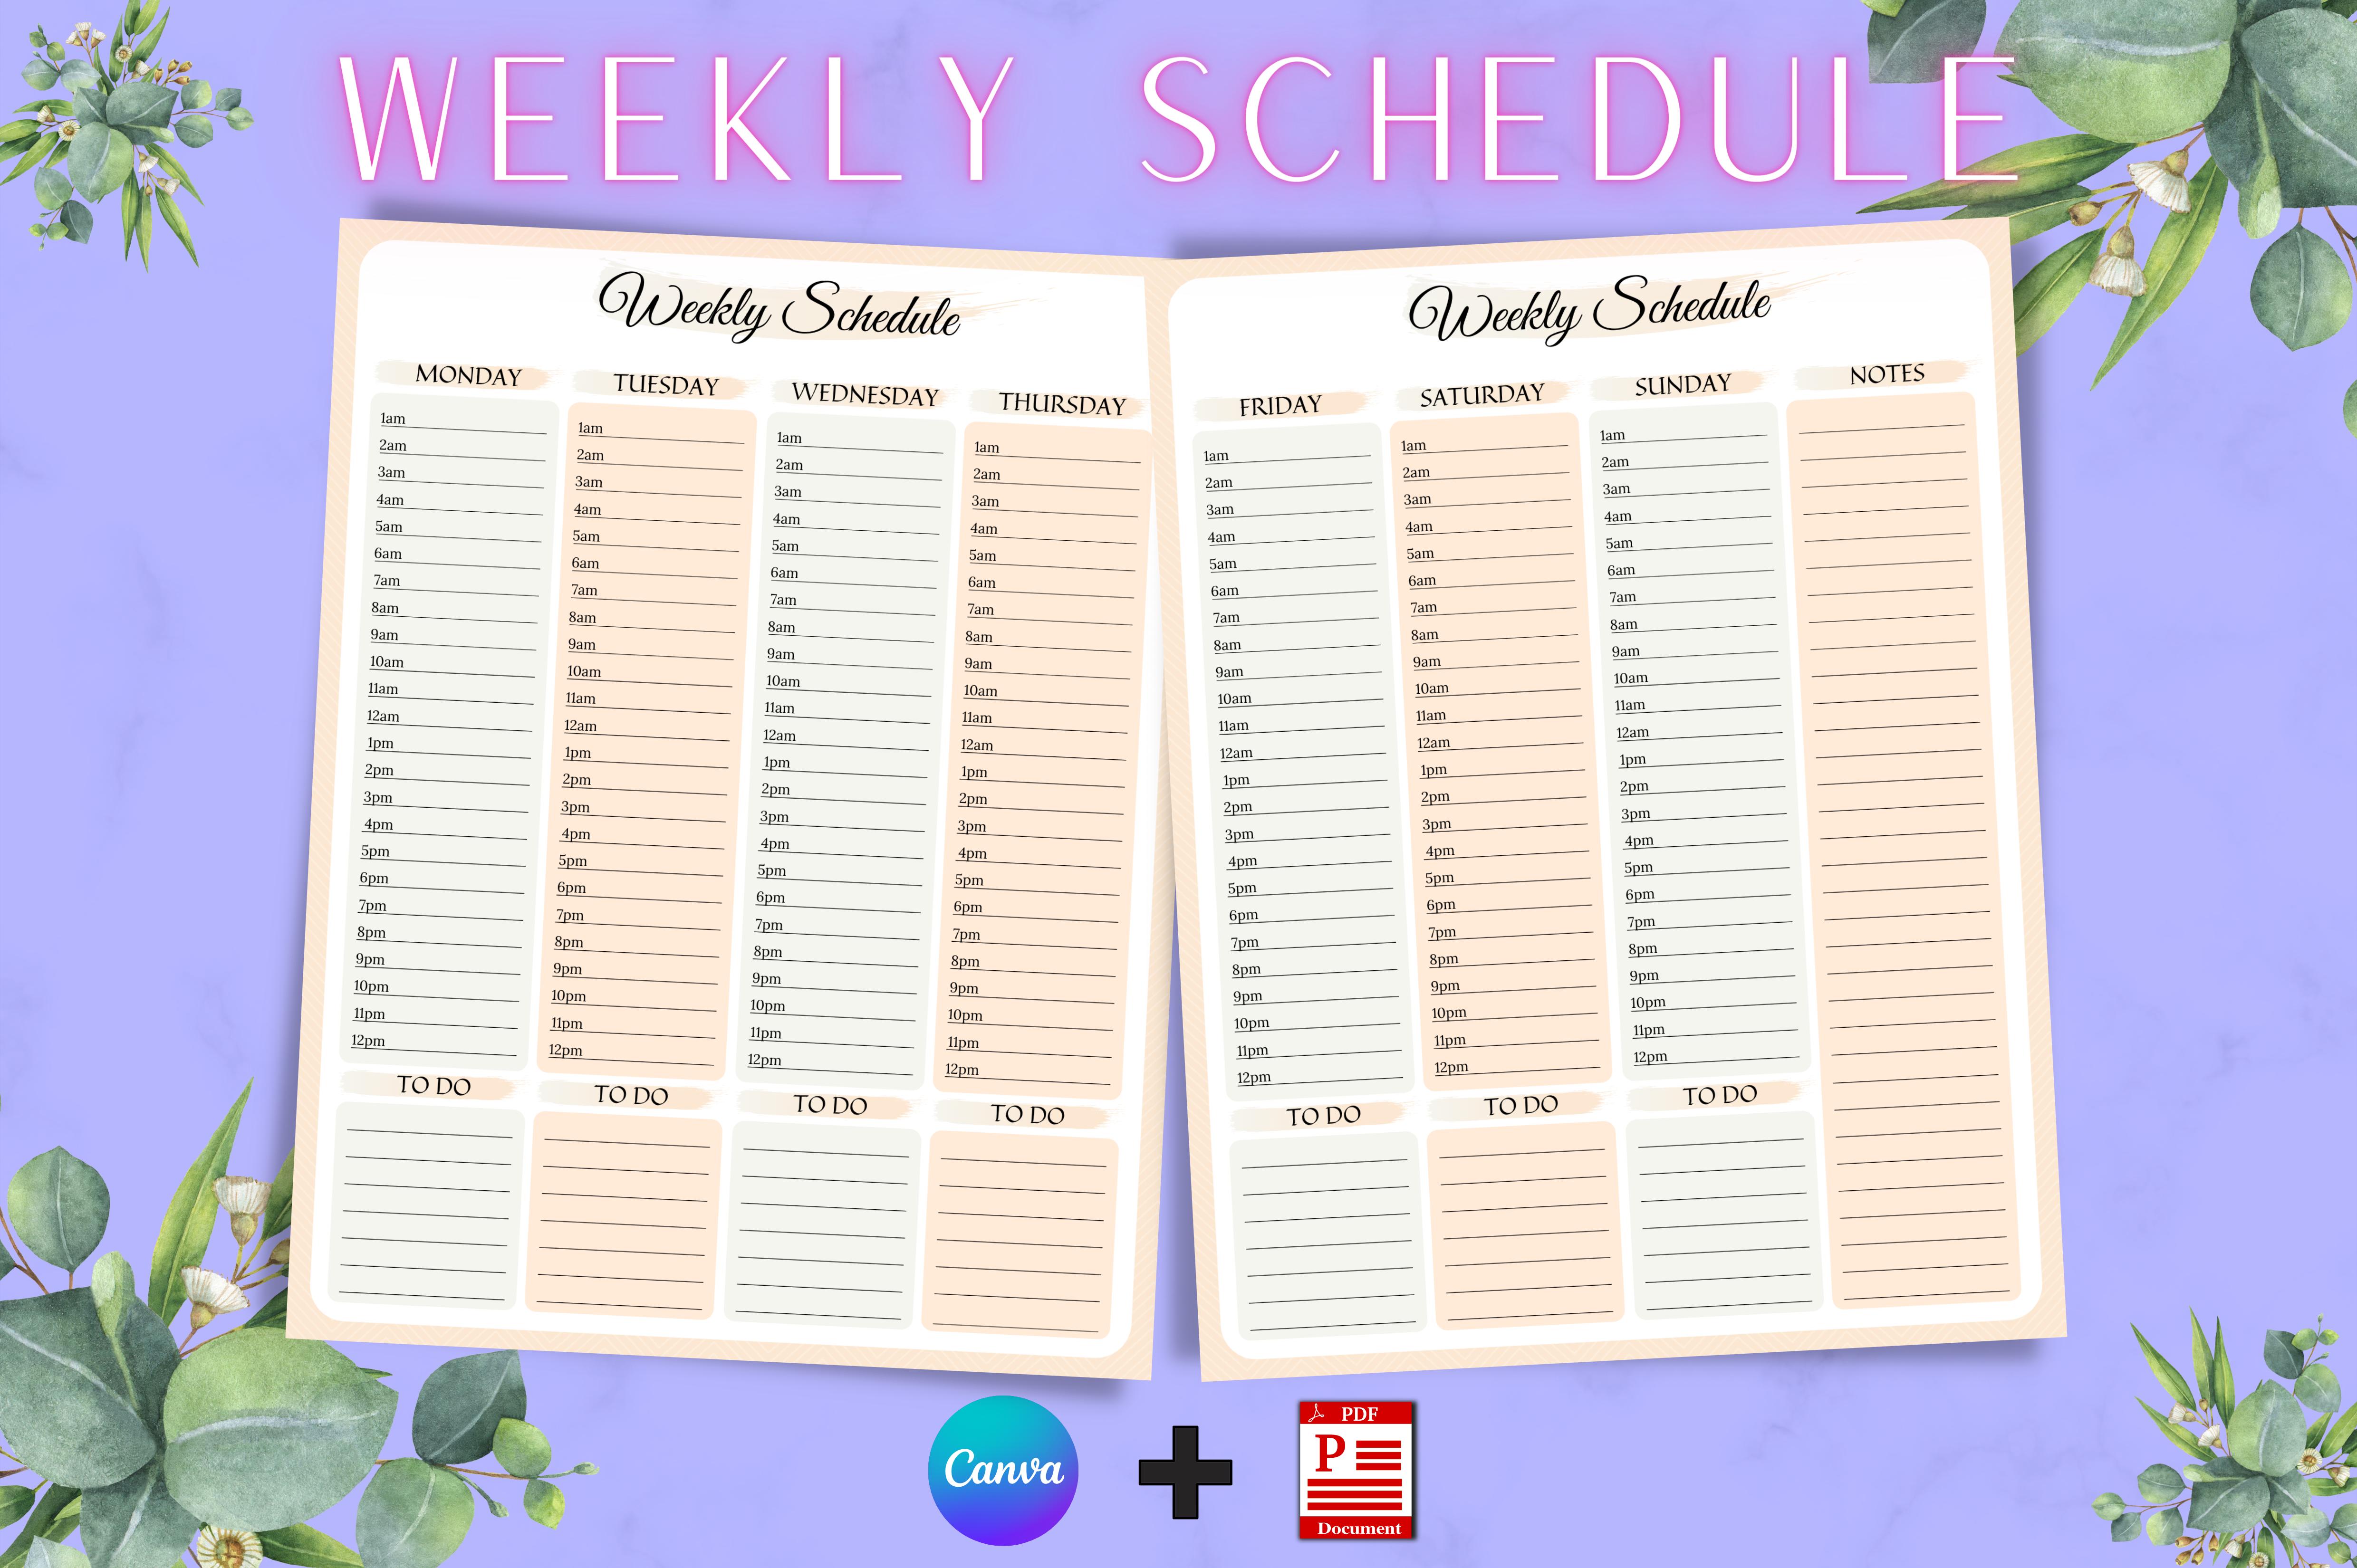 Weekly Schedule Page Canva Template